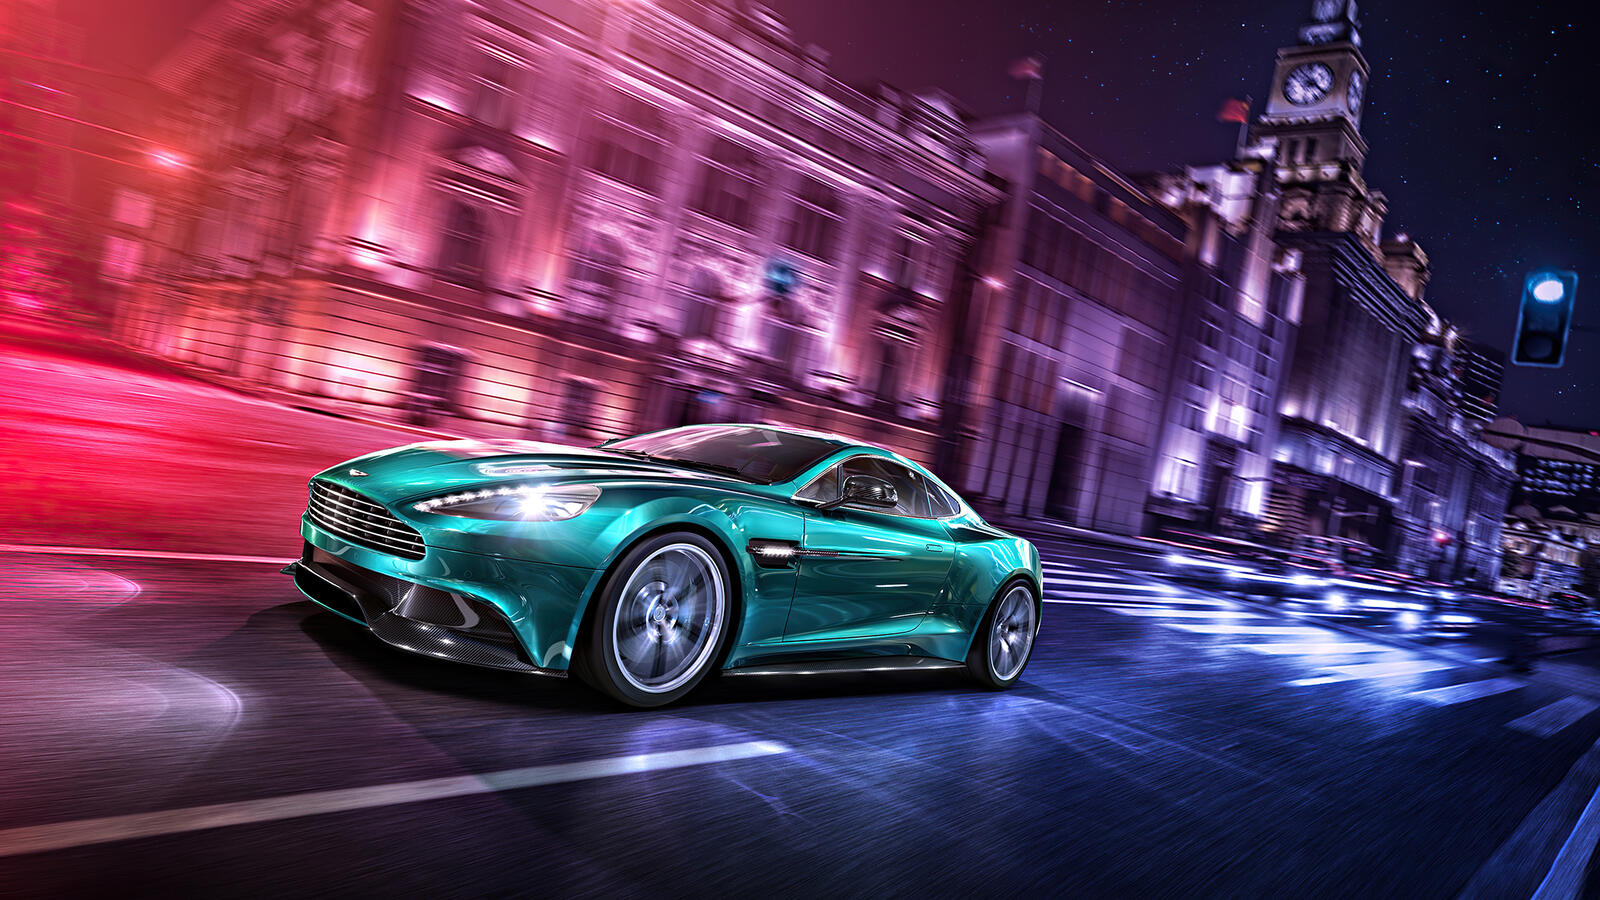 Free photo A rendering of a picture of an Aston Martin Vanquish on a city night scene